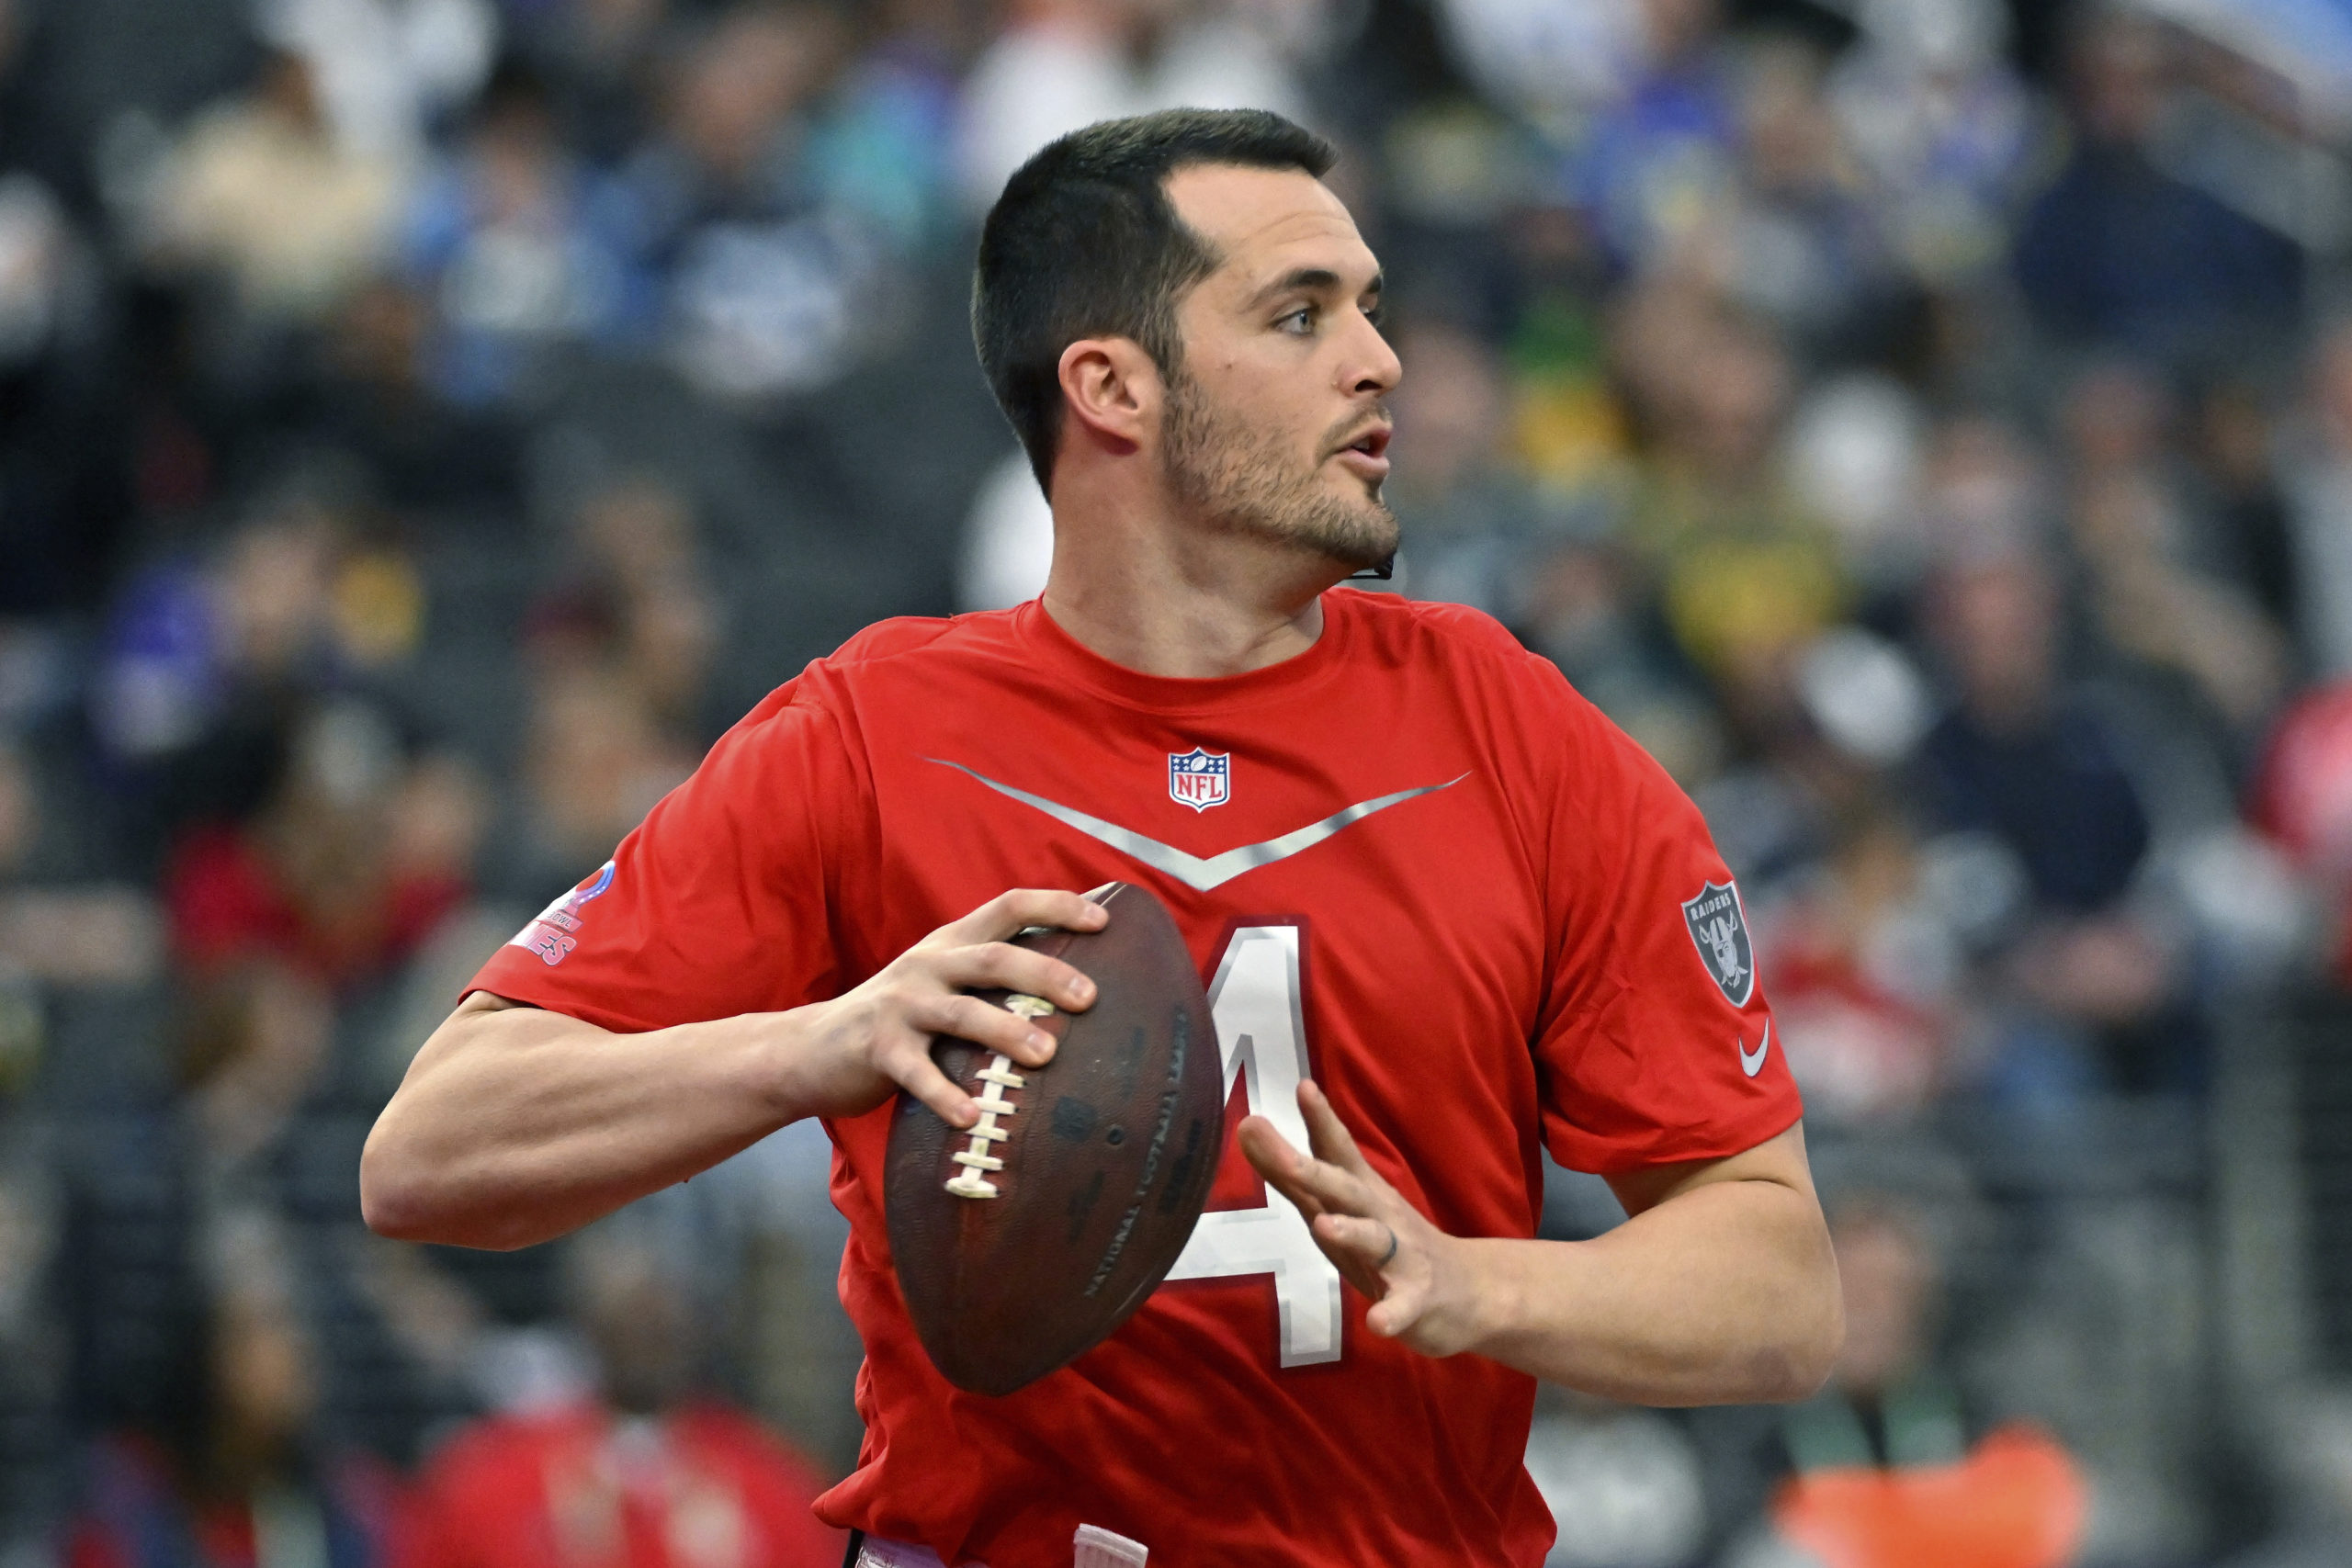 Quarterback Derek Carr looks to pass during a flag football event at the NFL Pro Bowl in Las Vegas on Feb. 5.